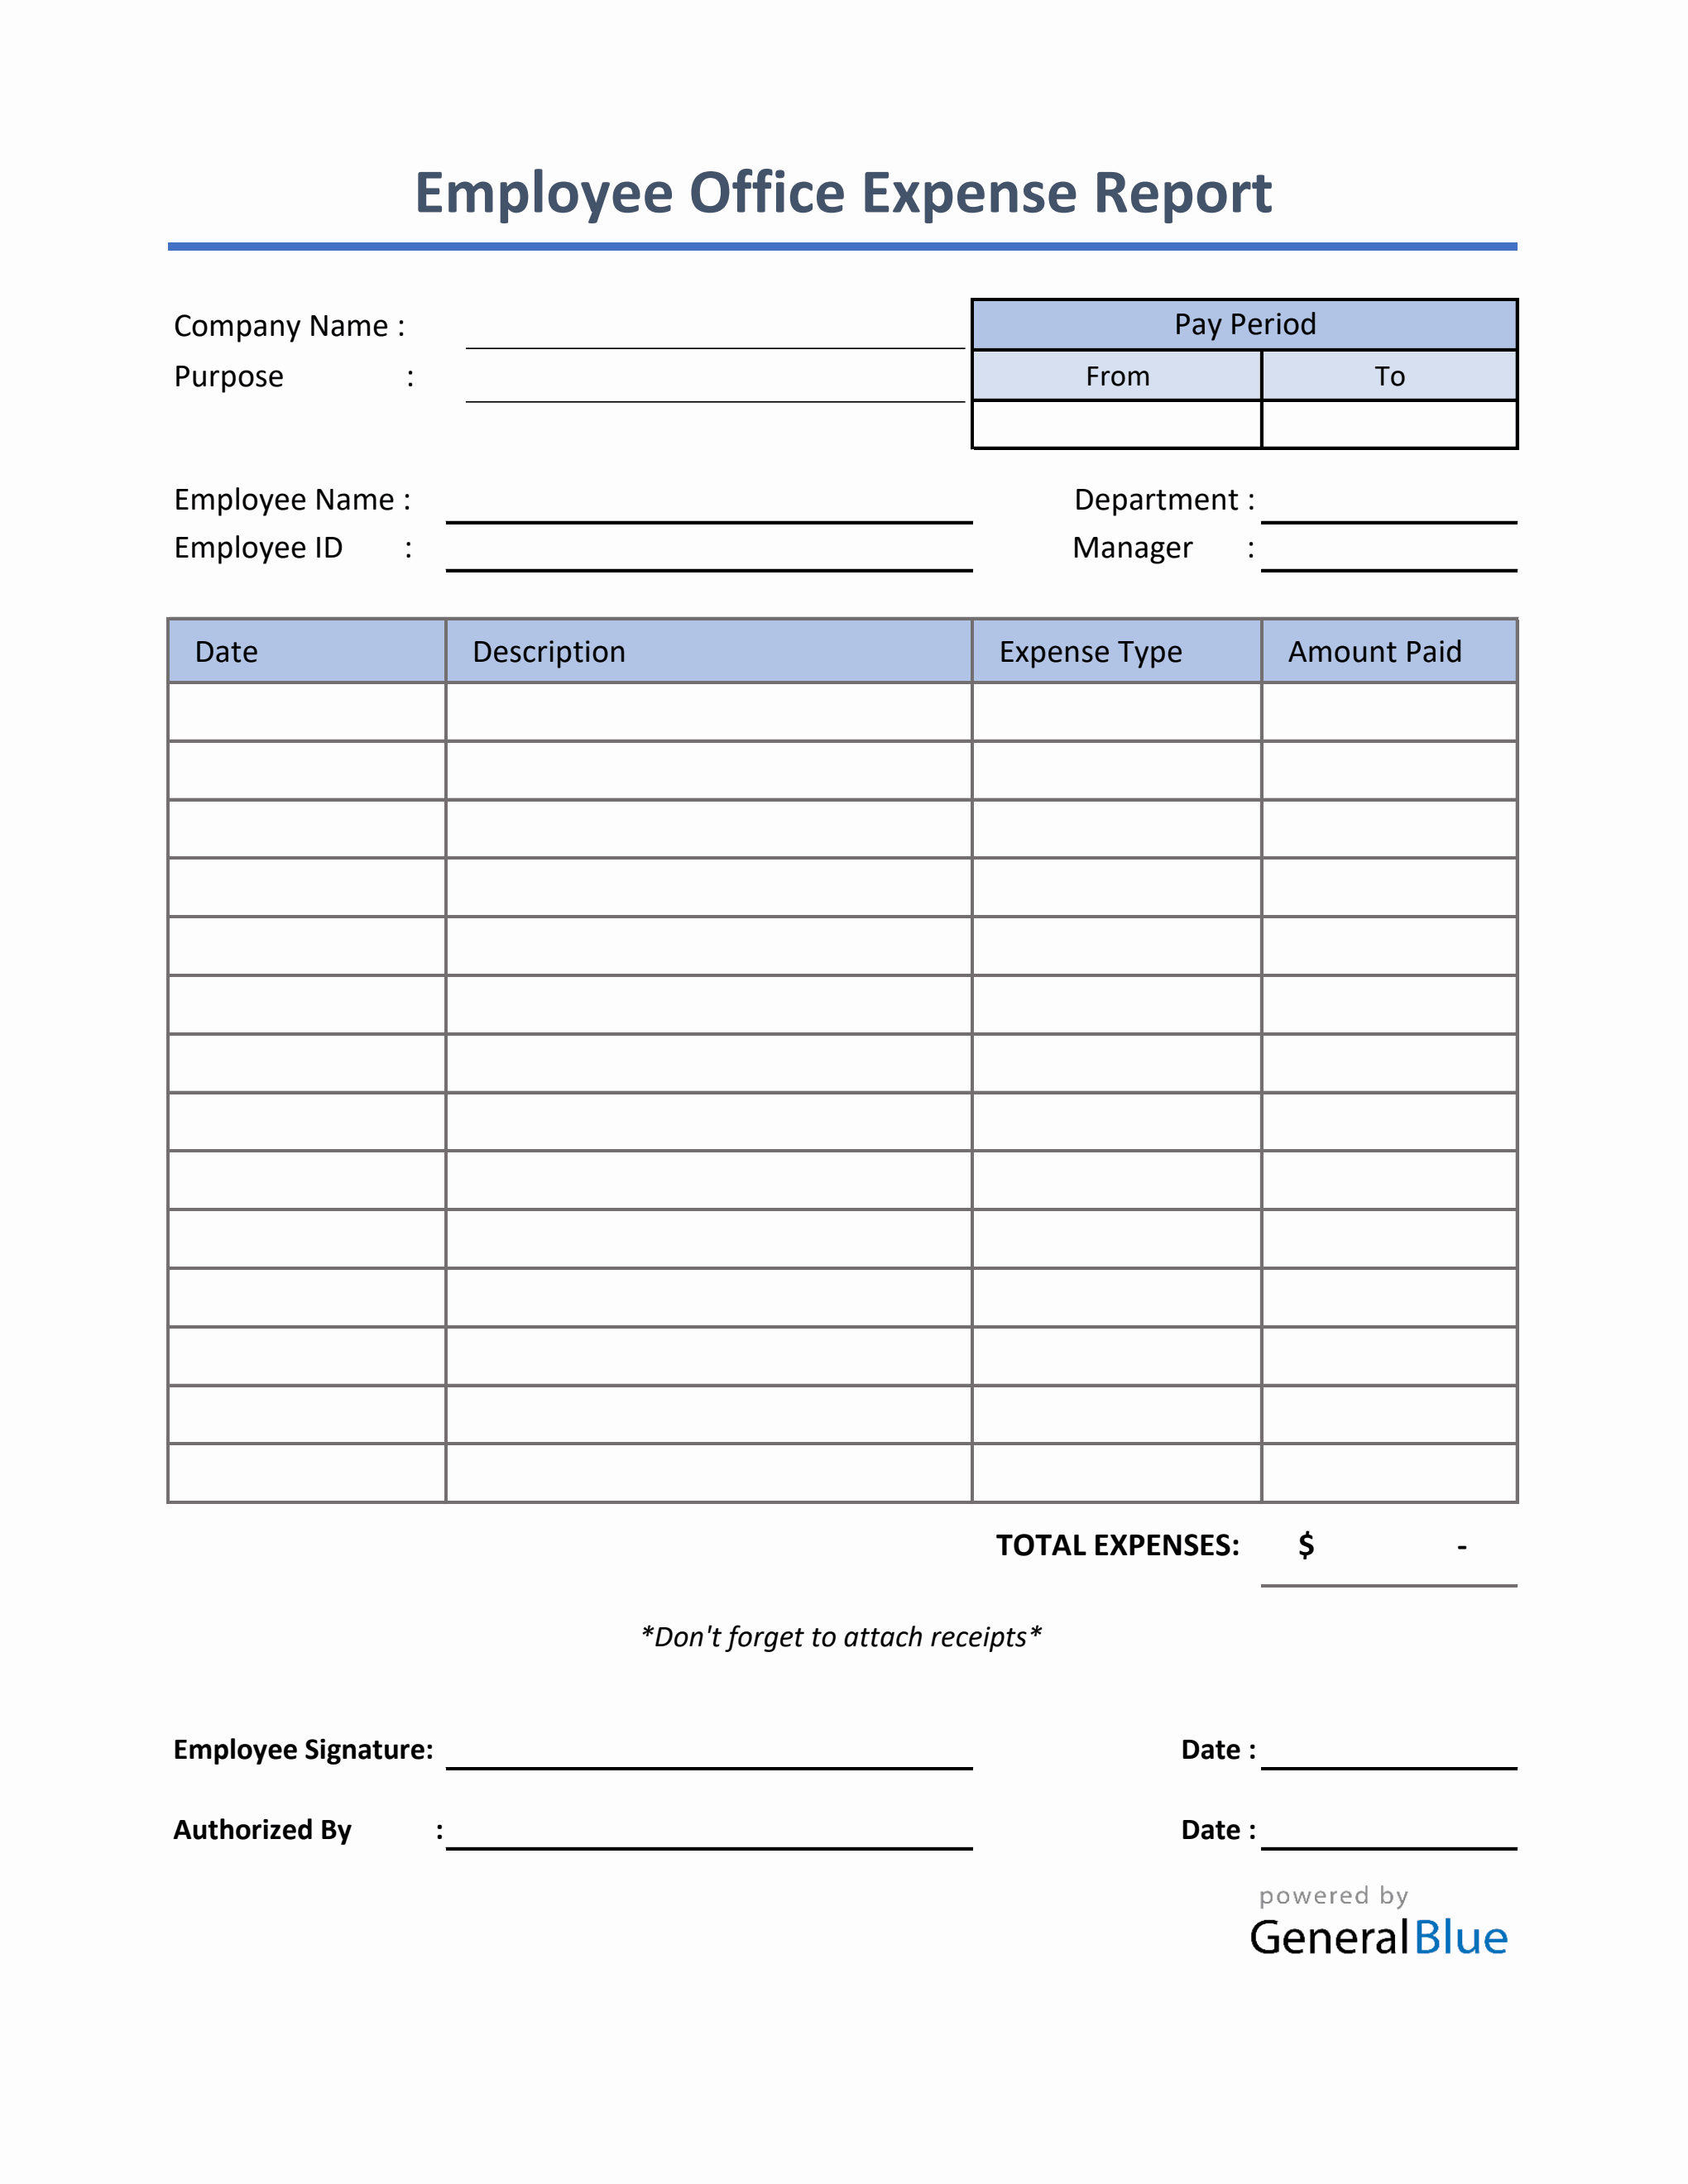 Employee Office Expense Report Template in Excel Throughout Company Expense Report Template